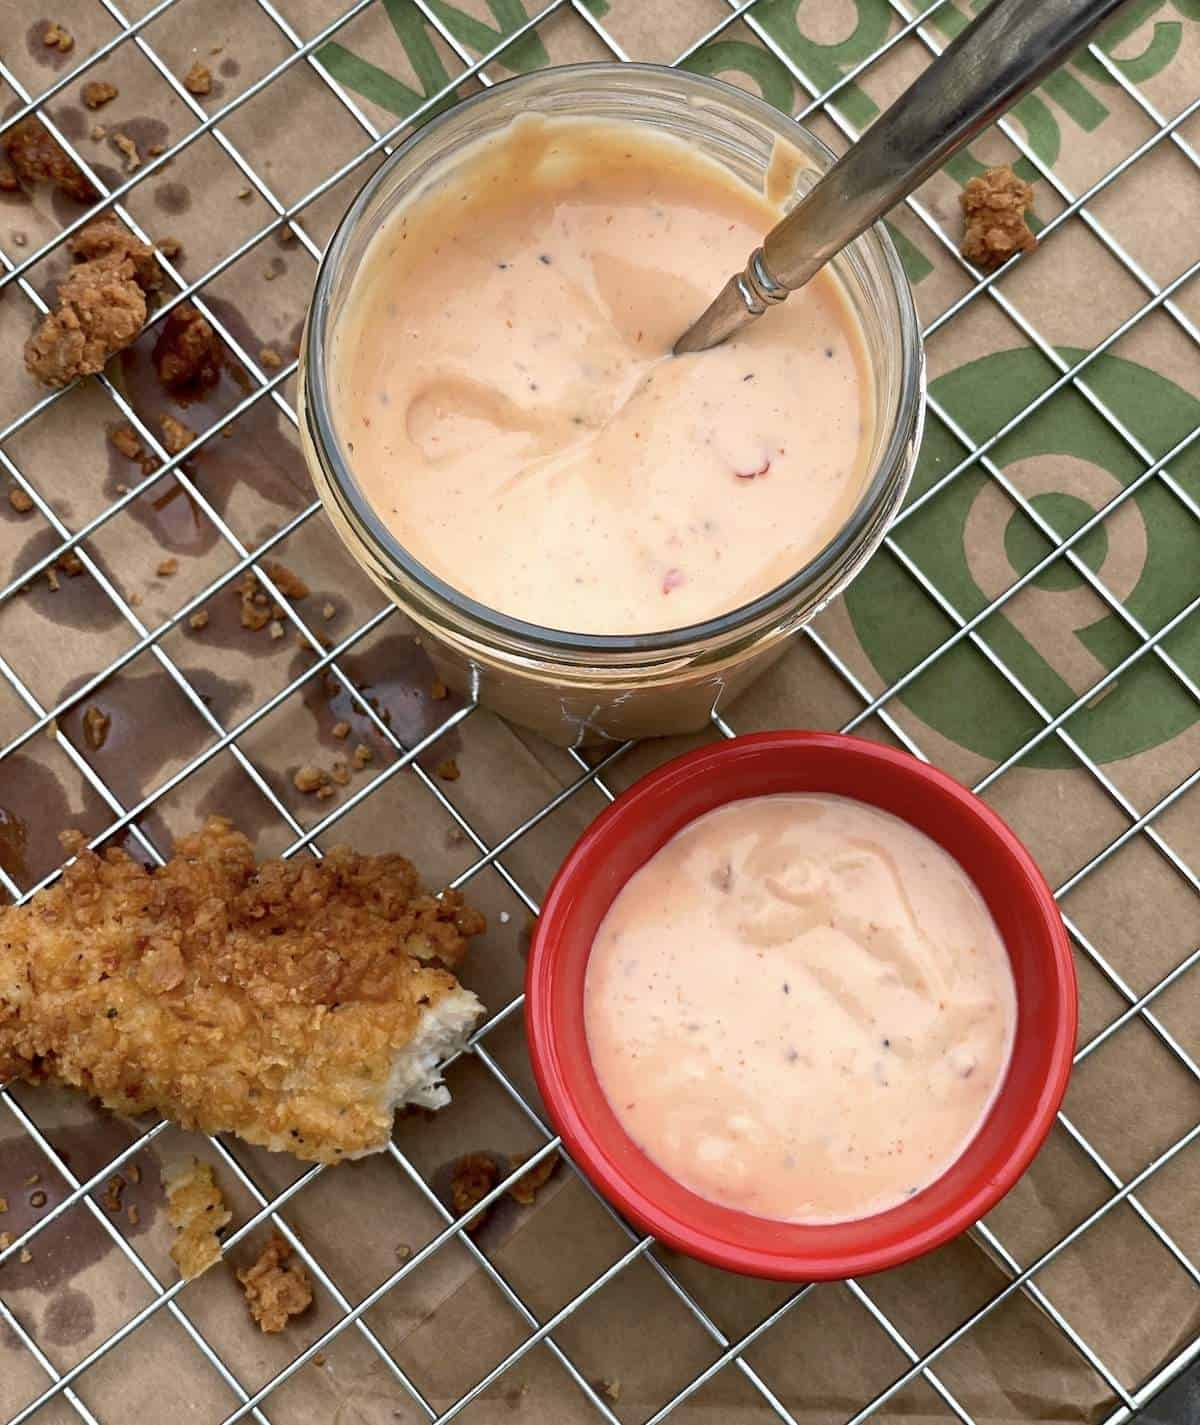 A jar of boom boom sauce, a bowl of boom boom sauce, and a chicken tender.